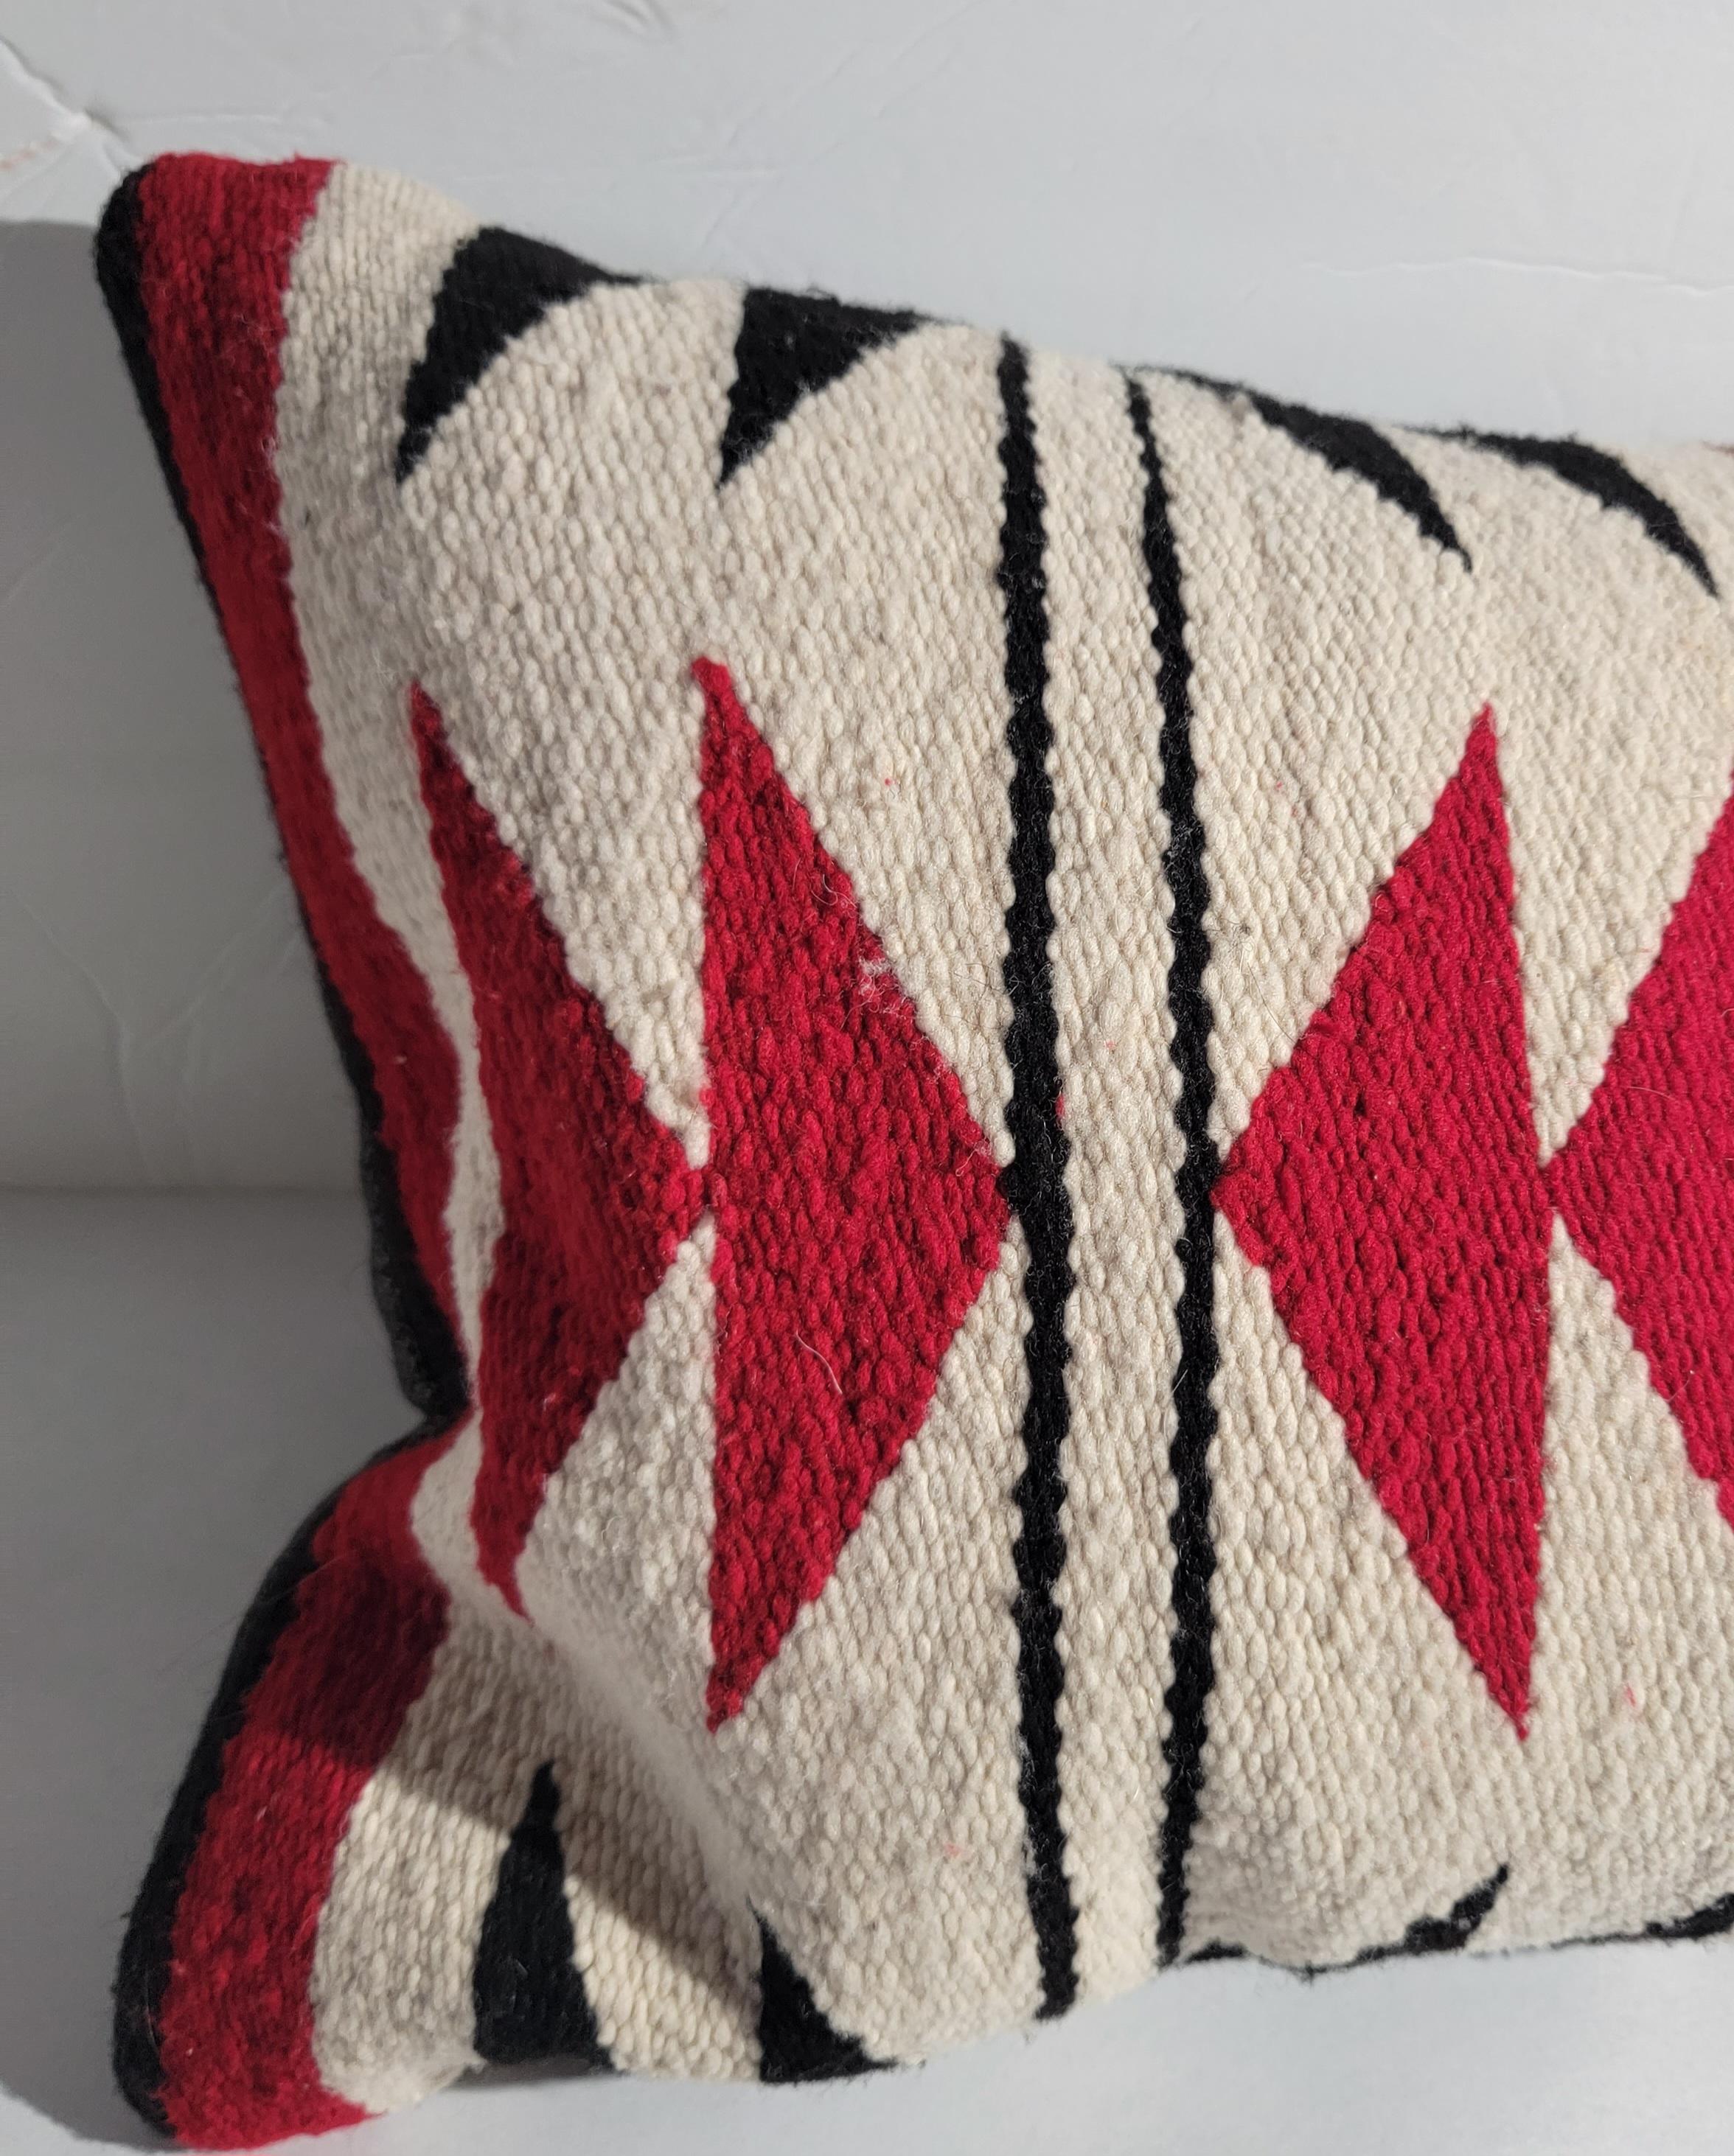 Set of four Navajo weaving pillows This set of four is chosen at random. The set is chosen by the reds and browns. All in very good condition and have linen backings.The inserts are down & feather fill.
Sold as a collection of four assorted weaving